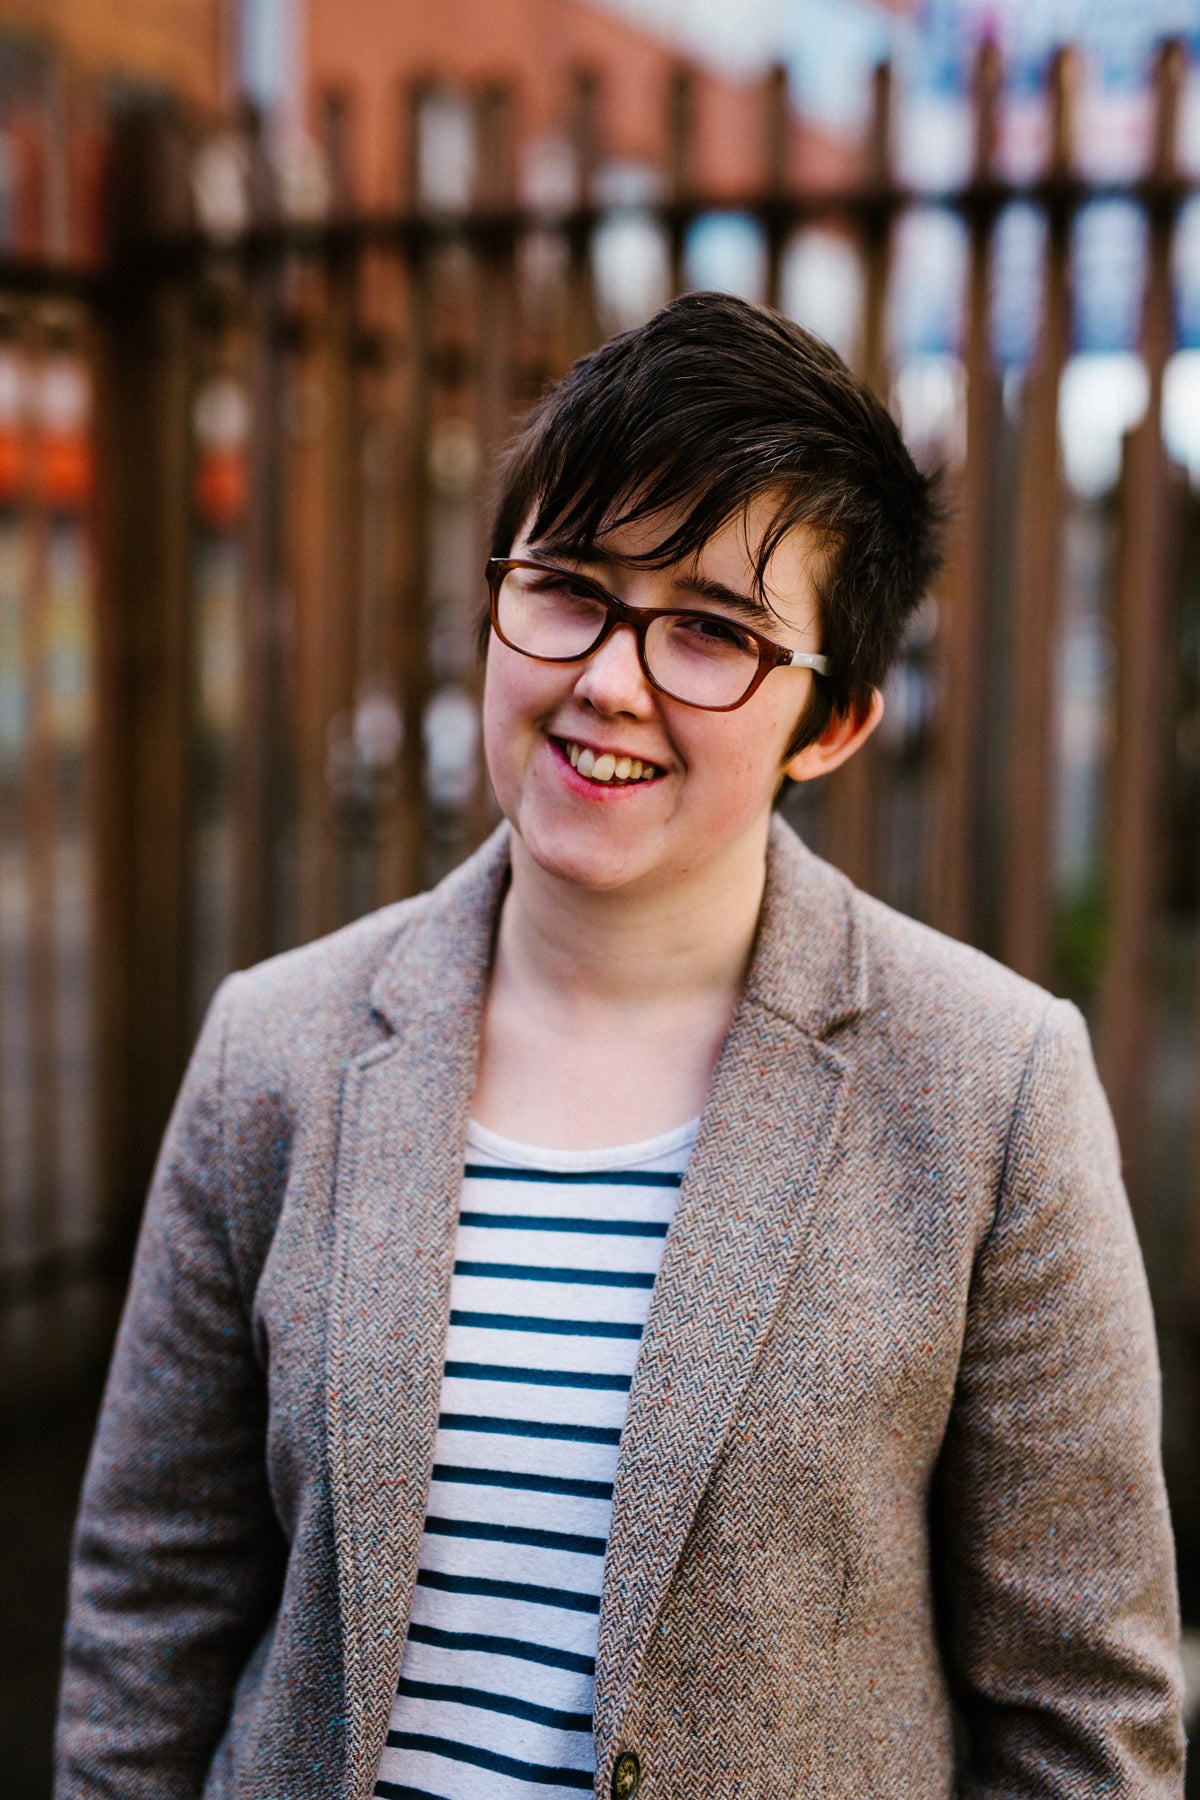 Channel 4 announces film about life and death of journalist Lyra McKee